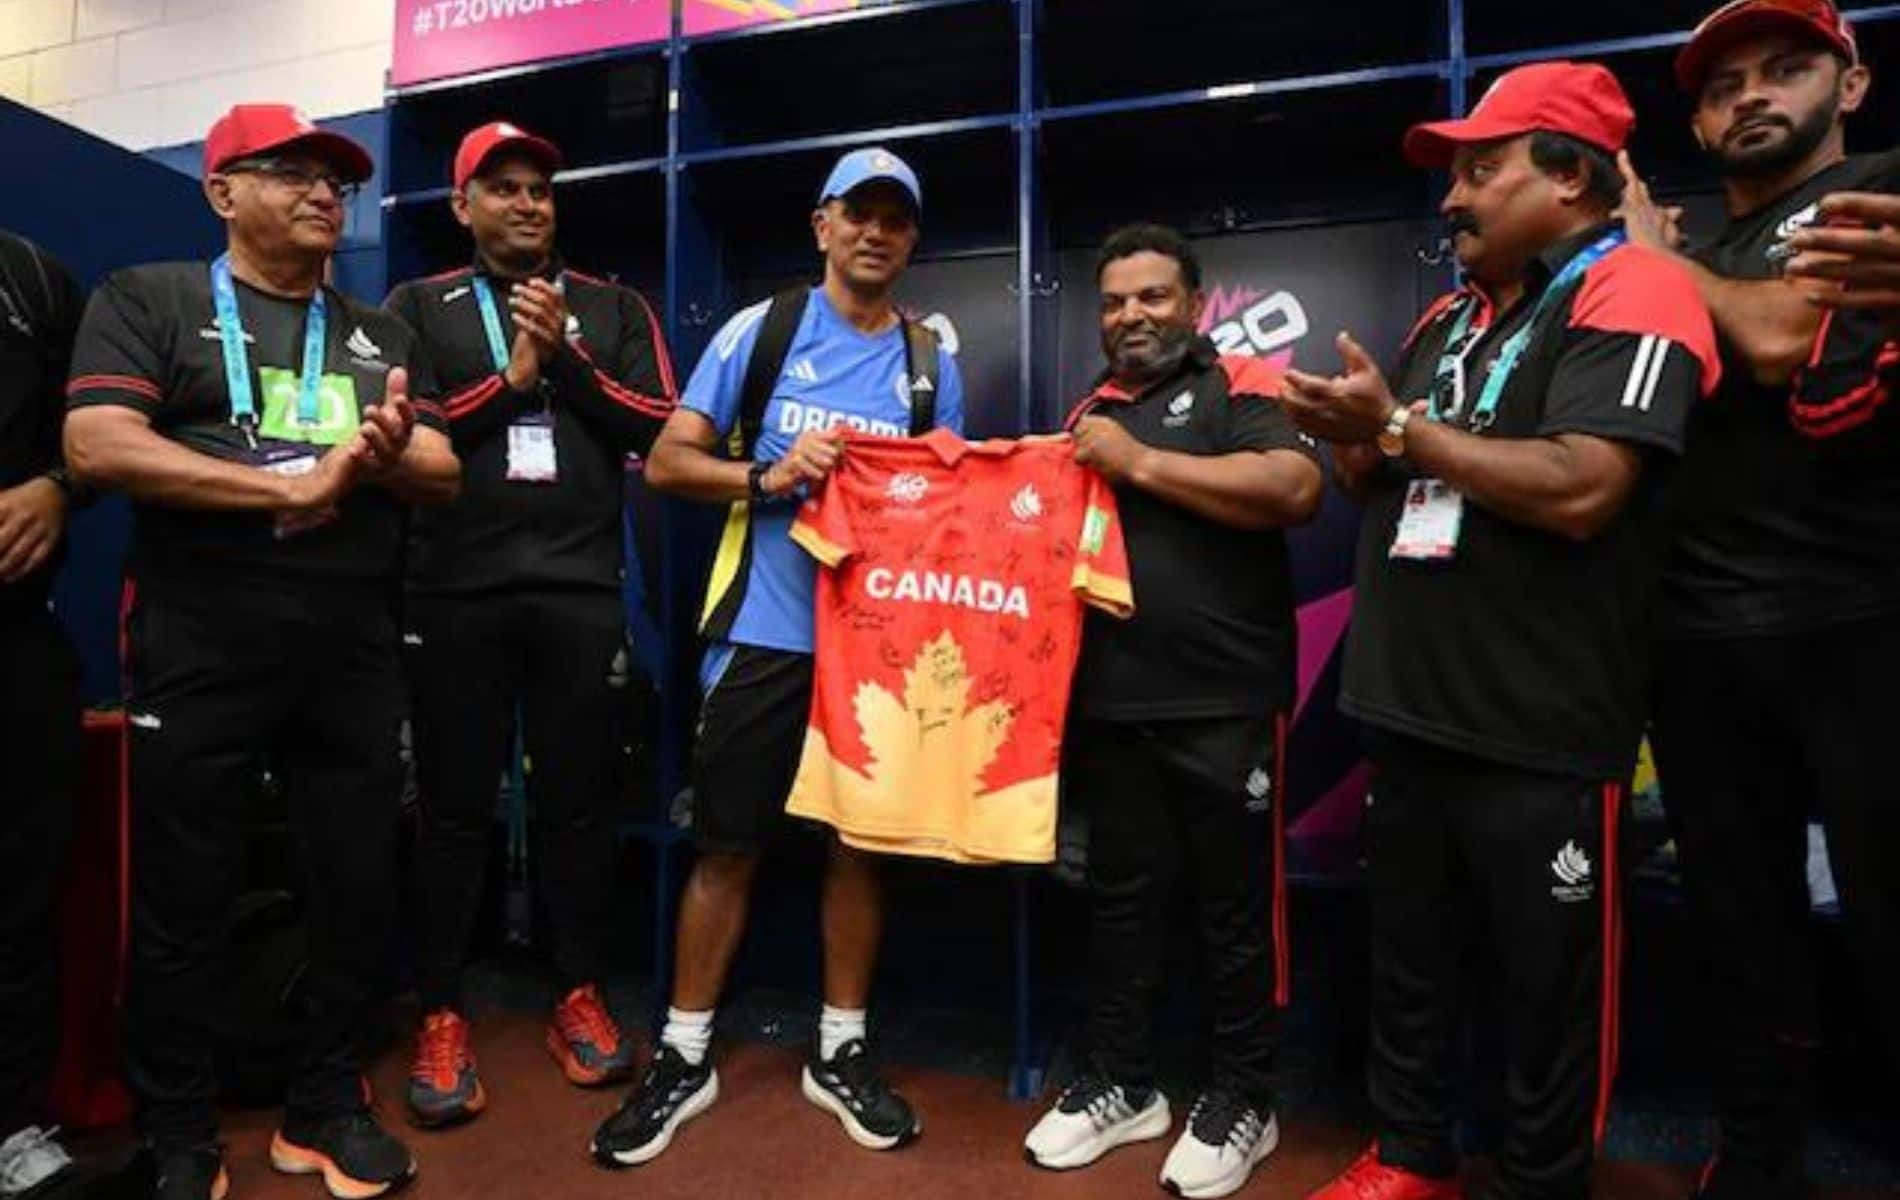 [Watch] Rahul Dravid's Words Of Wisdom To Motivate Canada After Their Inspirational Show In T20 WC